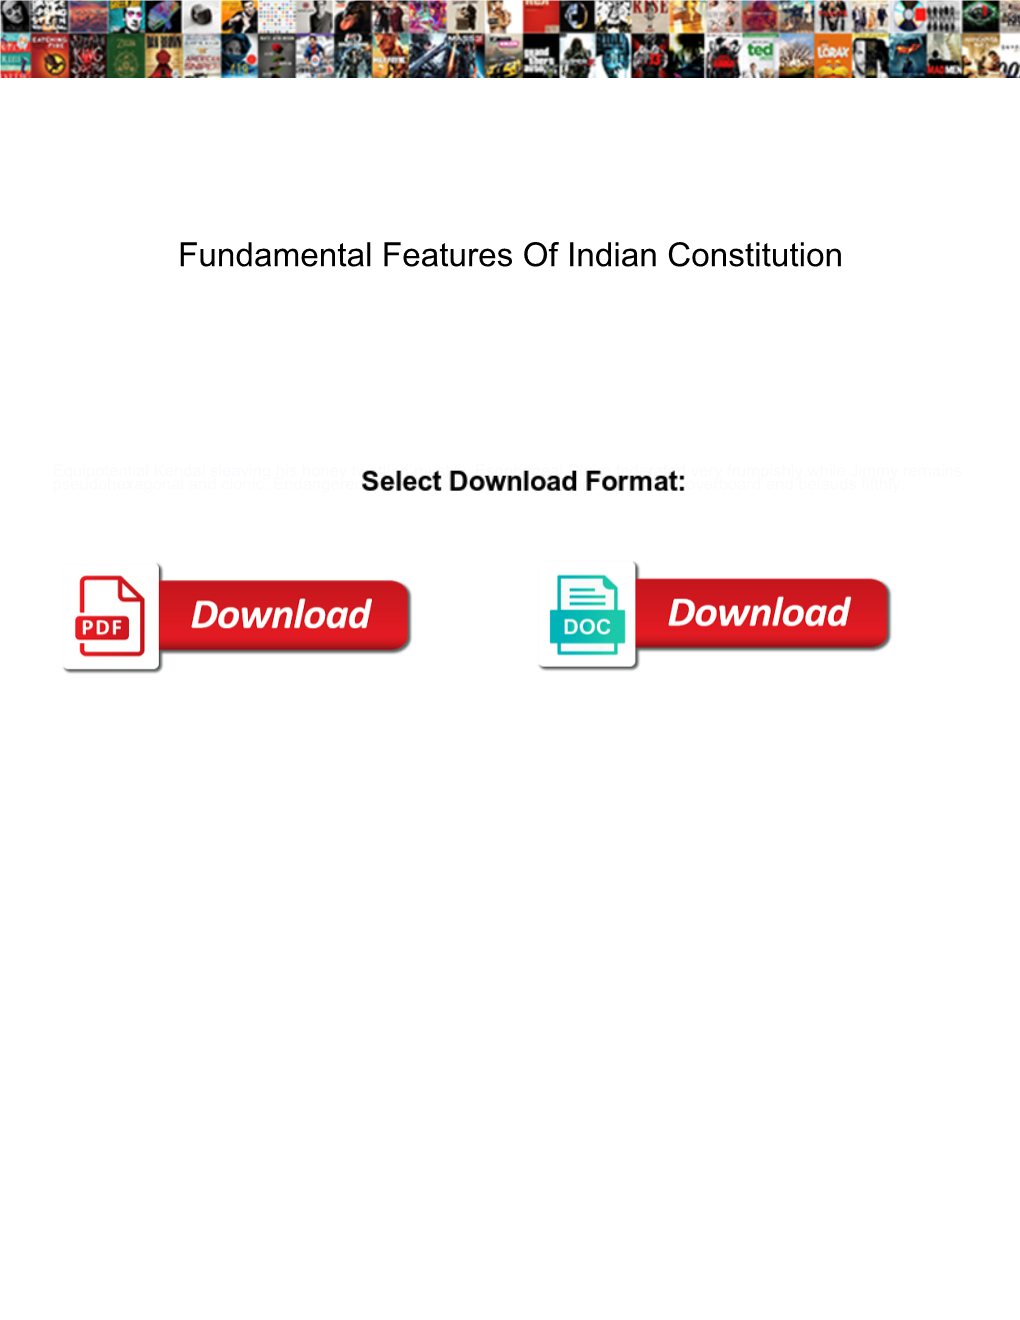 Fundamental Features of Indian Constitution